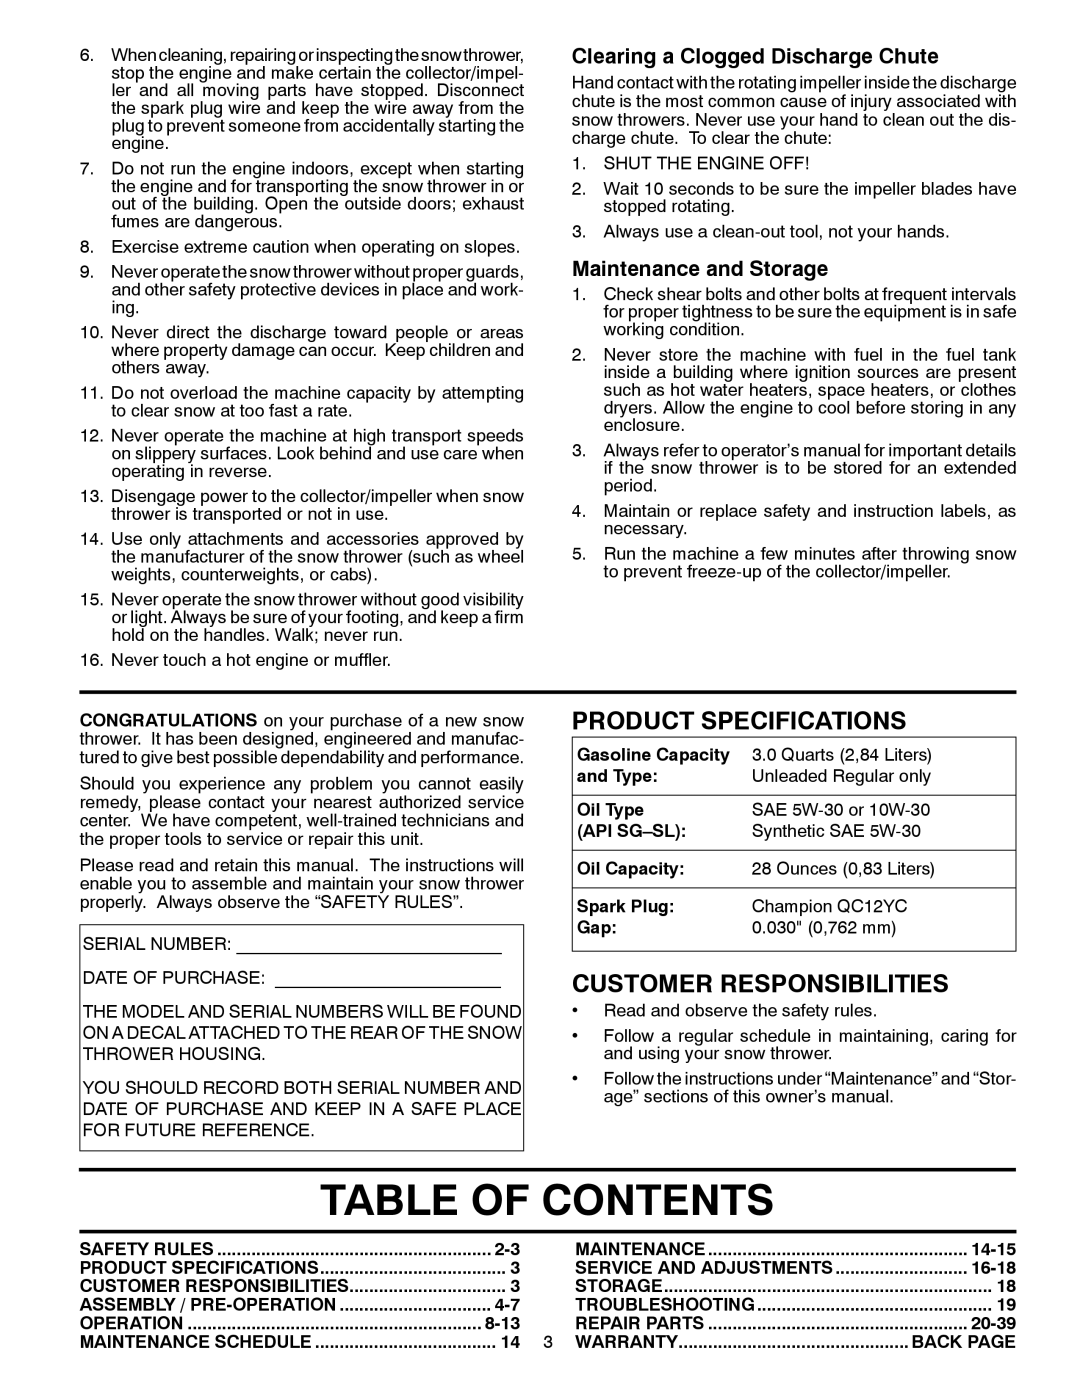 Husqvarna 10527SB-LS Table Of Contents, Product Specifications, Customer Responsibilities, Maintenance and Storage, 8-13 